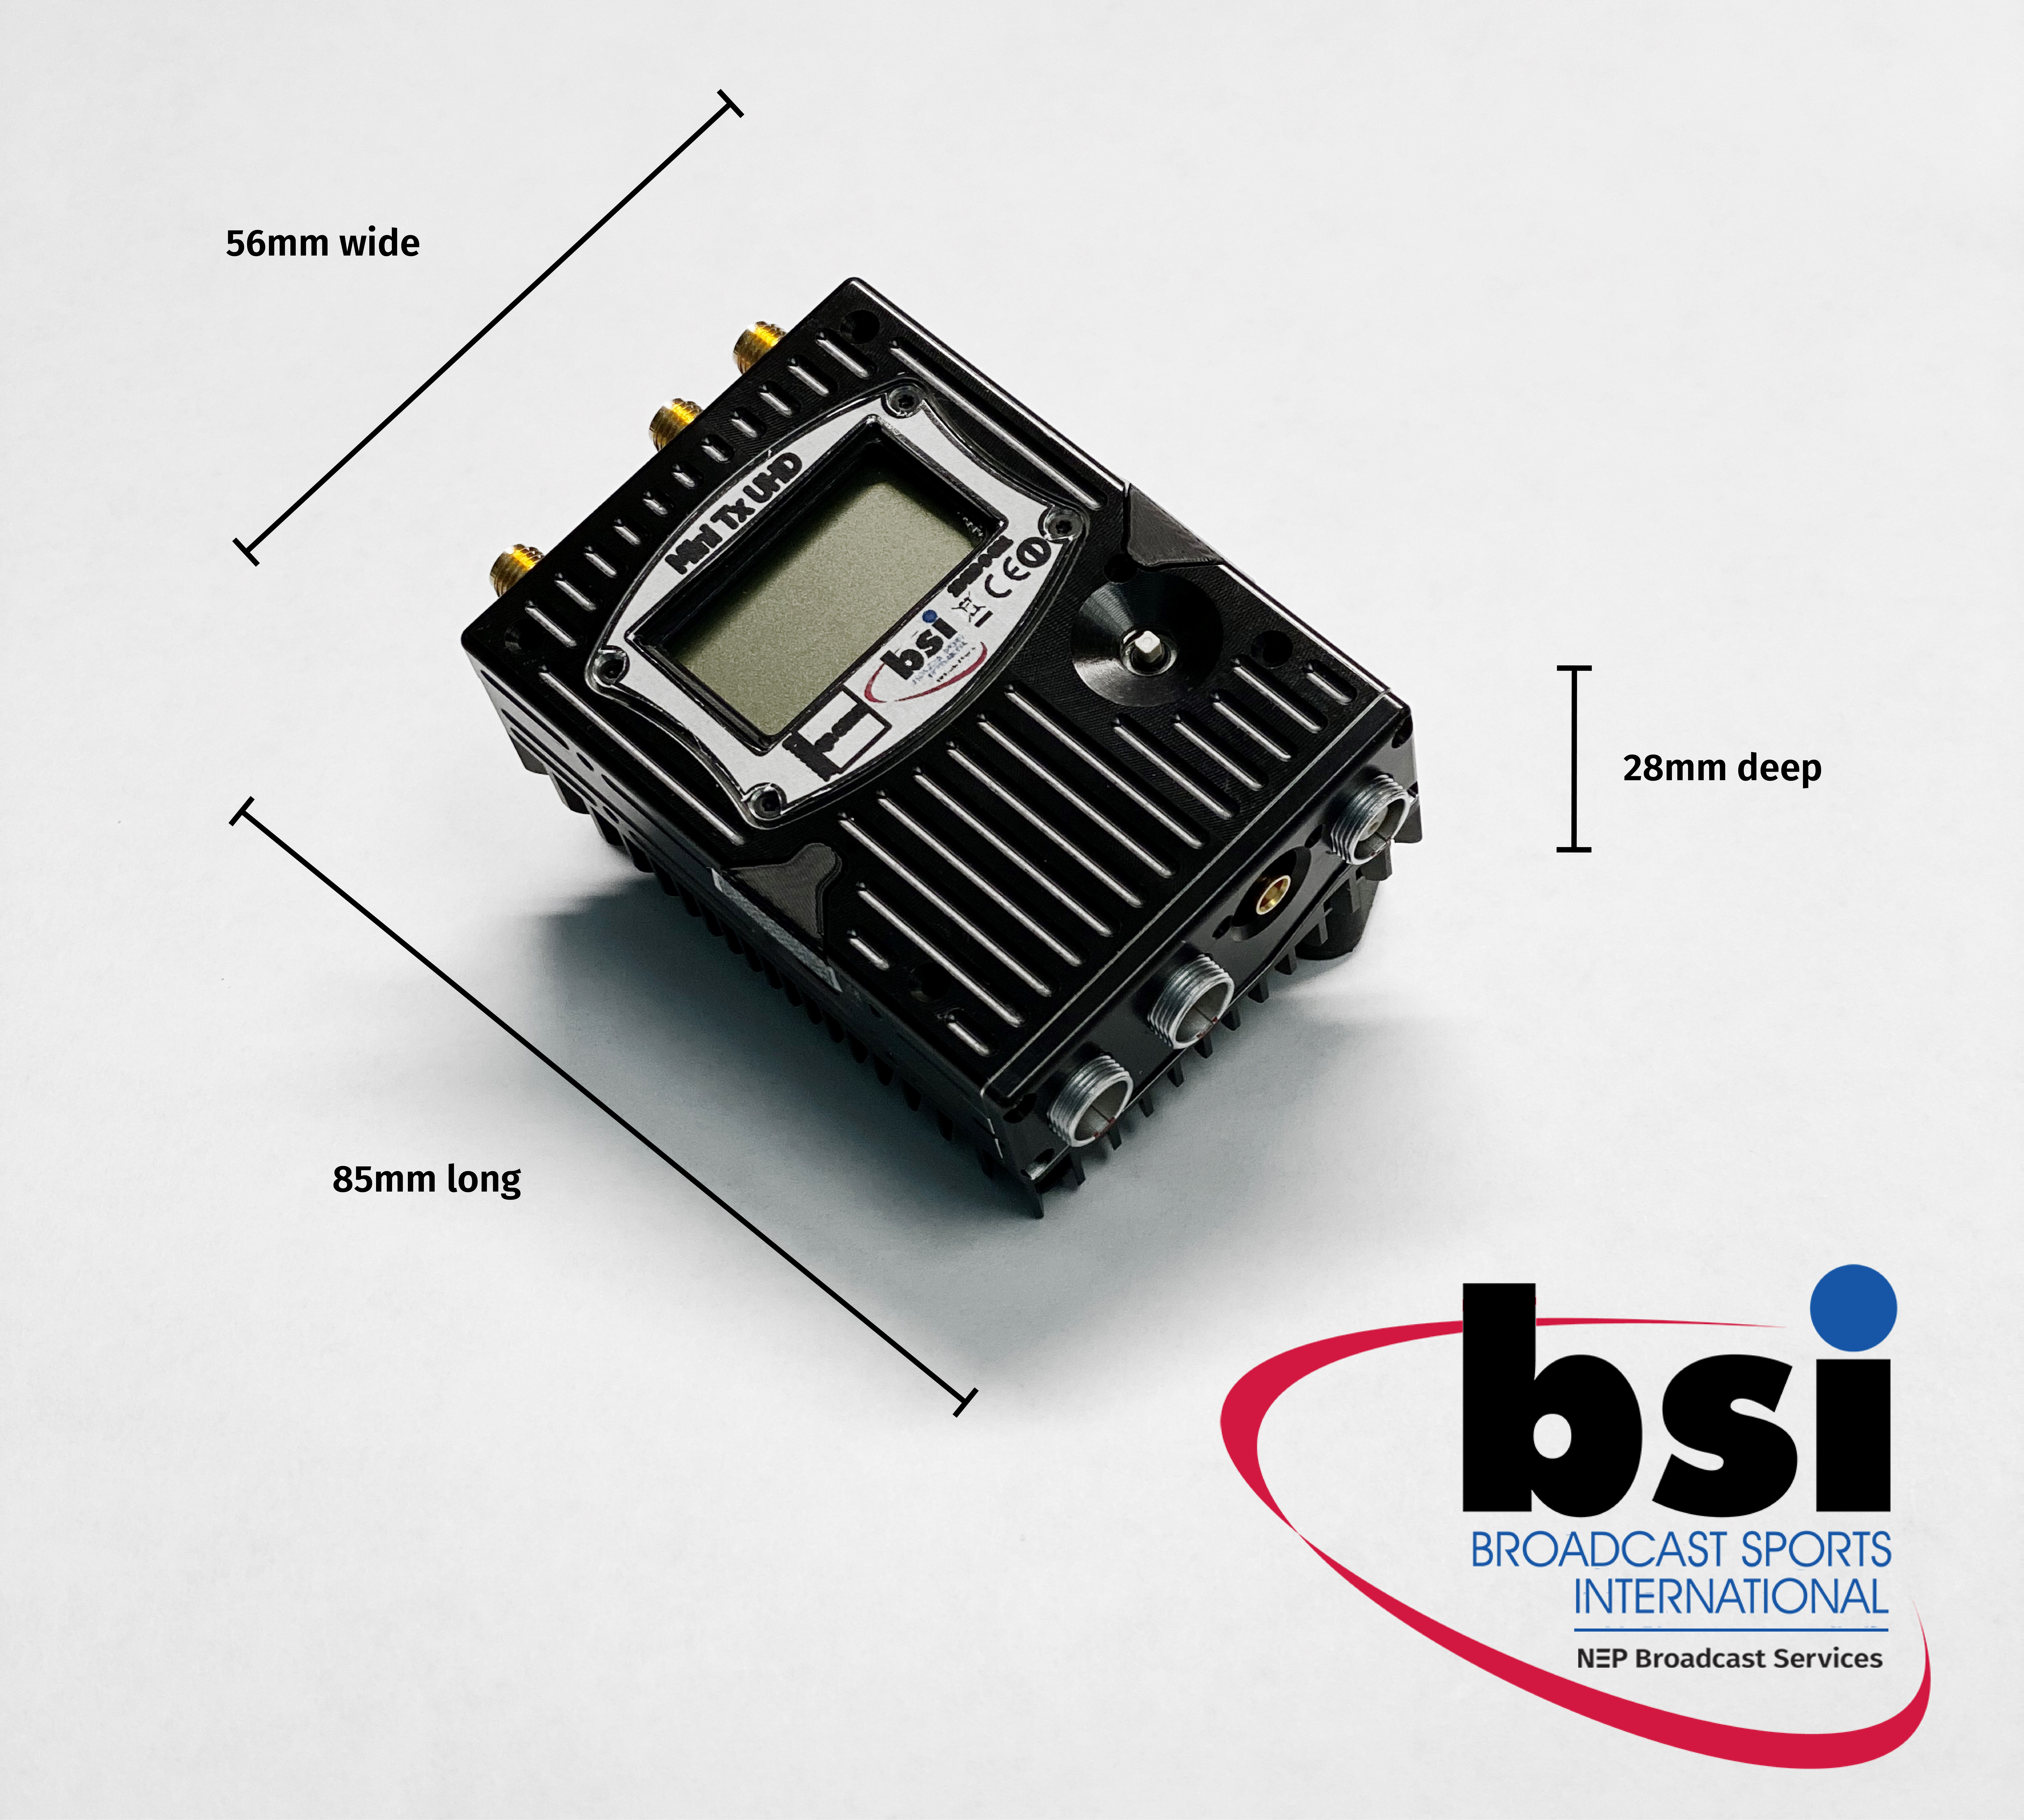 The BSI Mini Tx UHD wireless video transmitter is the smallest UHD wireless video transmitter available on the market today and has been used on several major events.